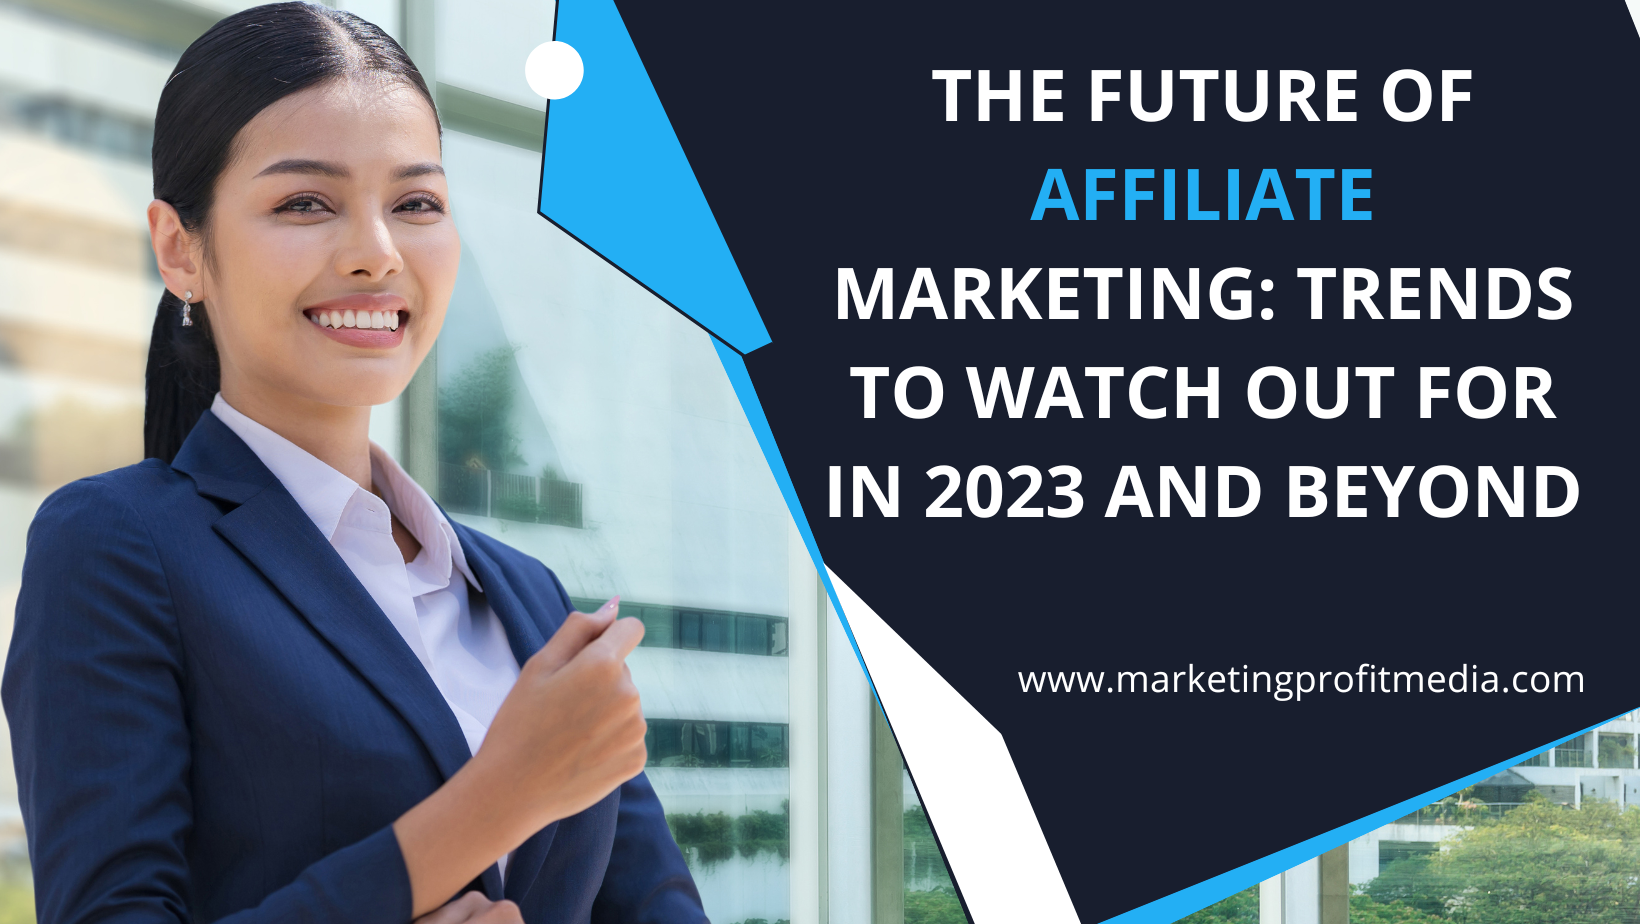 The future of affiliate marketing: Trends to watch out for in 2023 and beyond